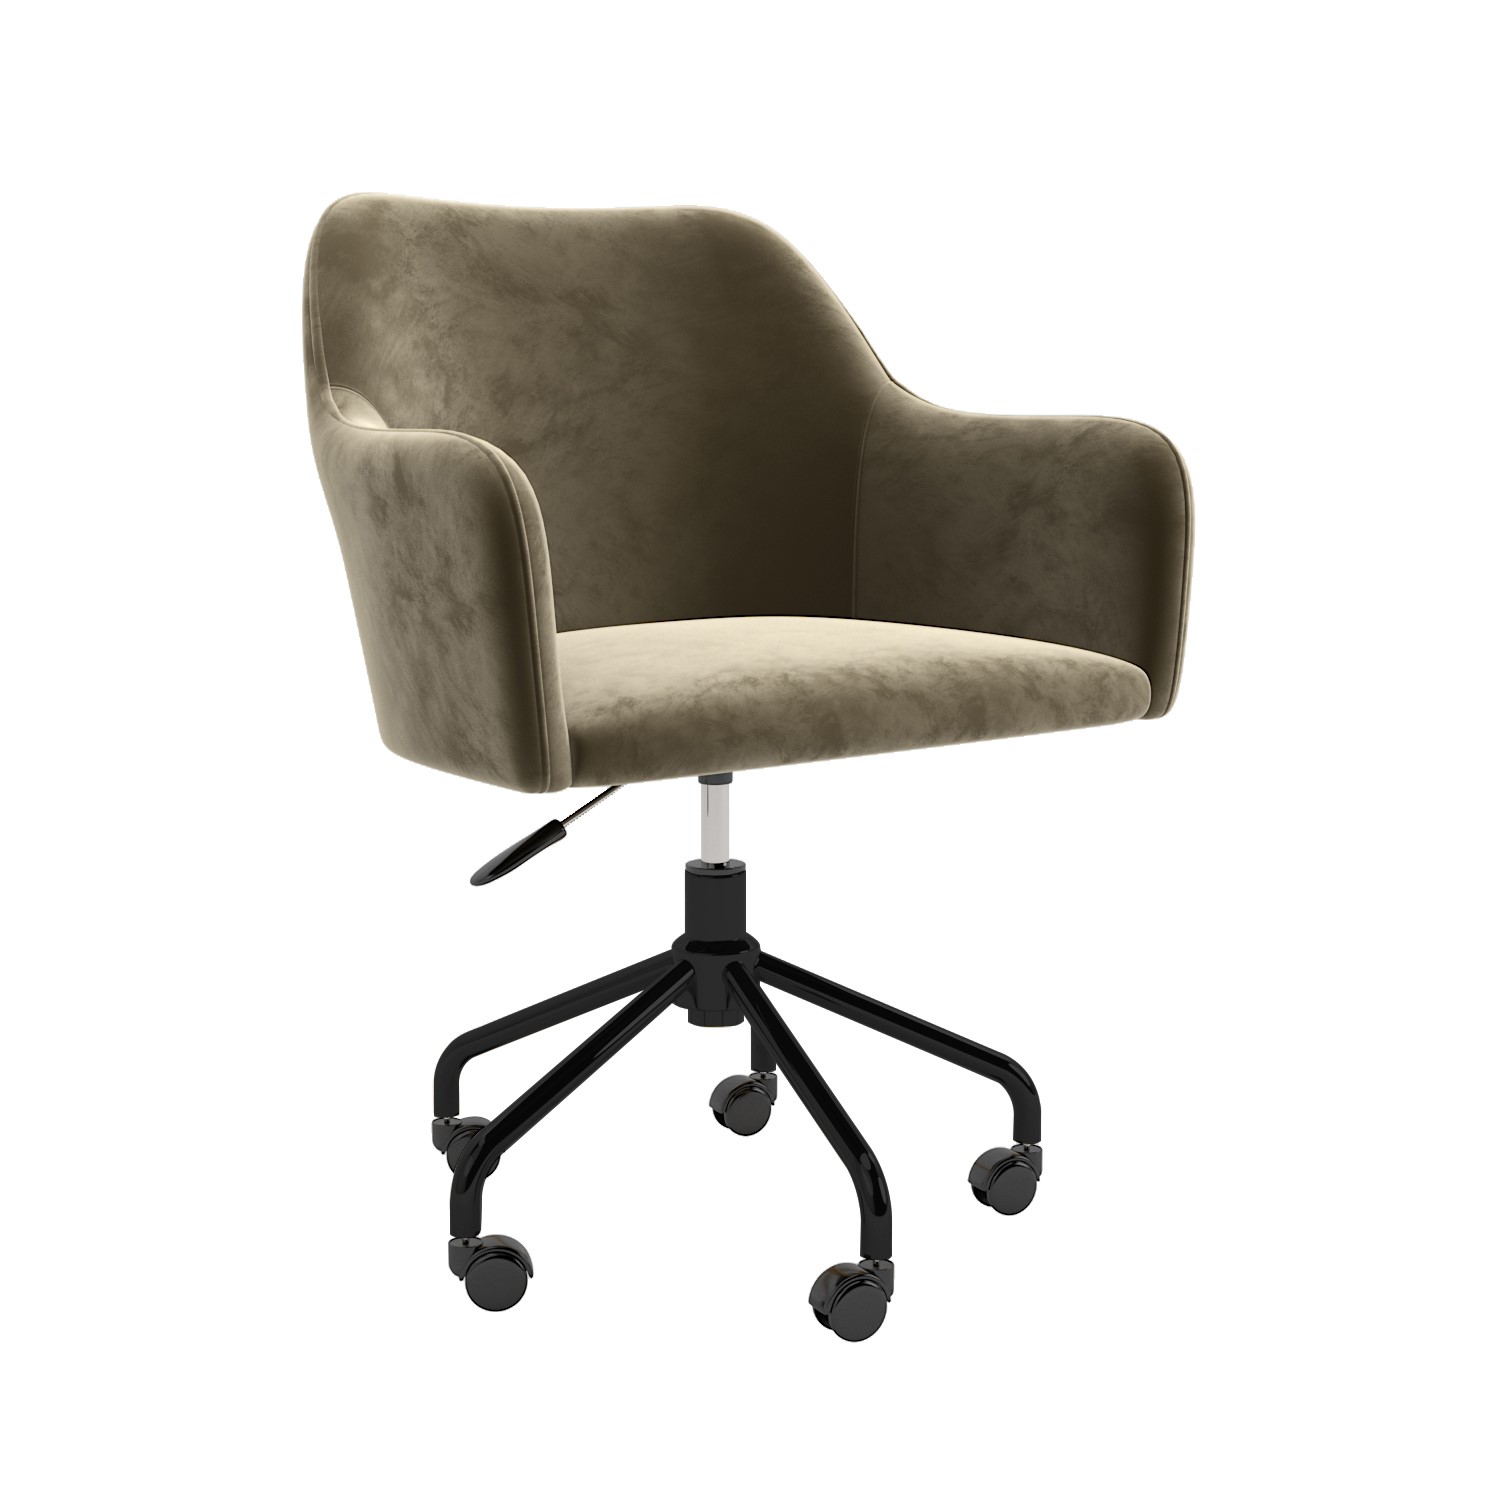 Photo of Beige velvet office chair with arms - marley